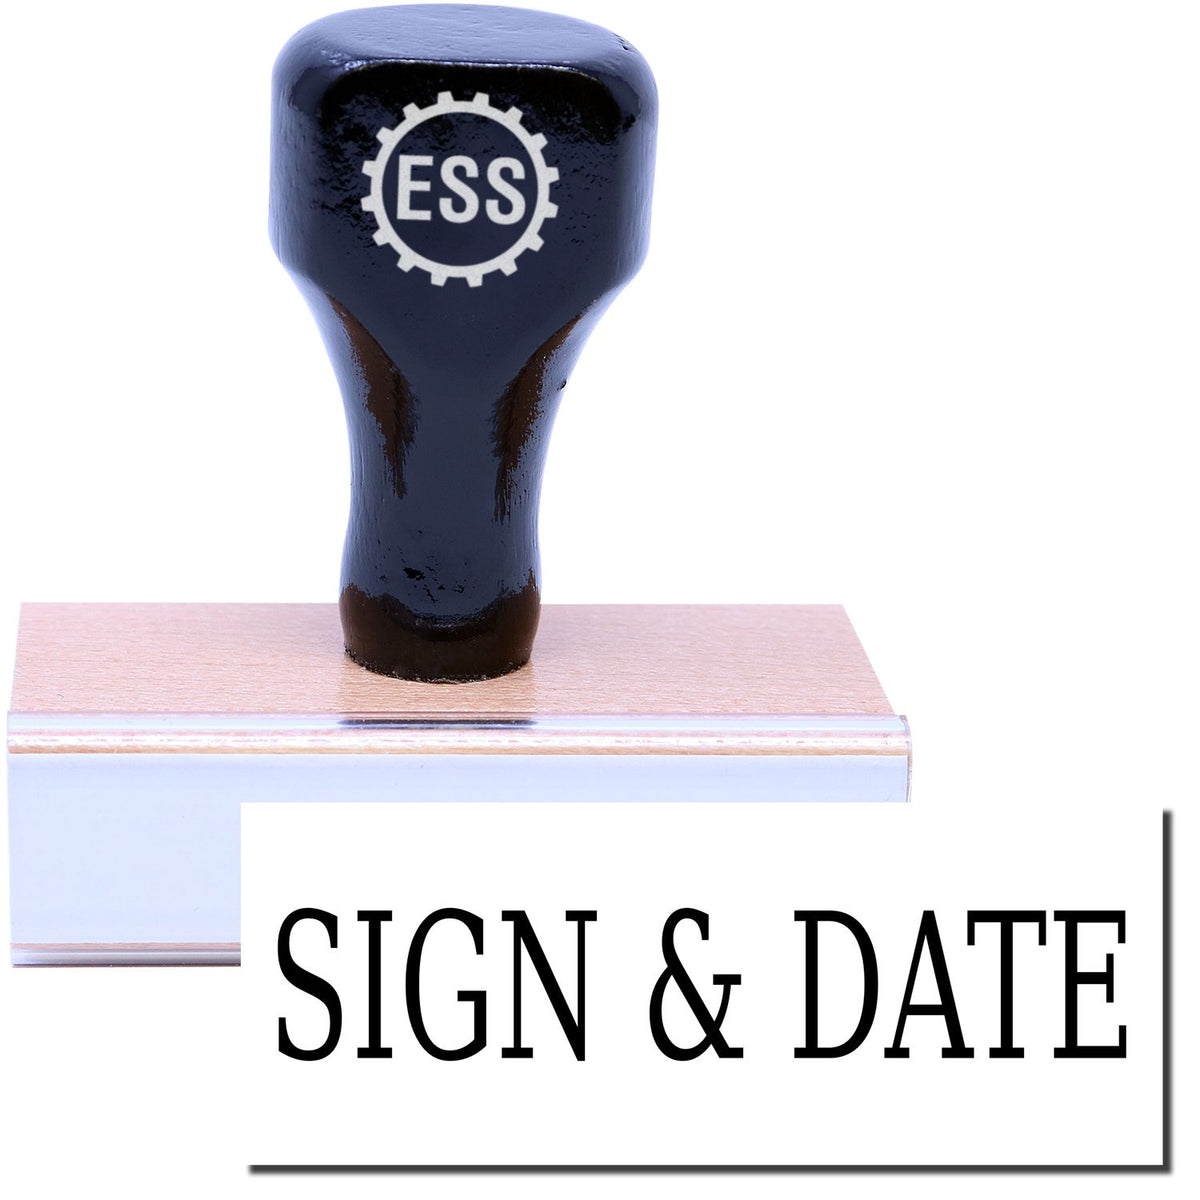 A stock office rubber stamp with a stamped image showing how the text &quot;SIGN &amp; DATE&quot; in a large font is displayed after stamping.